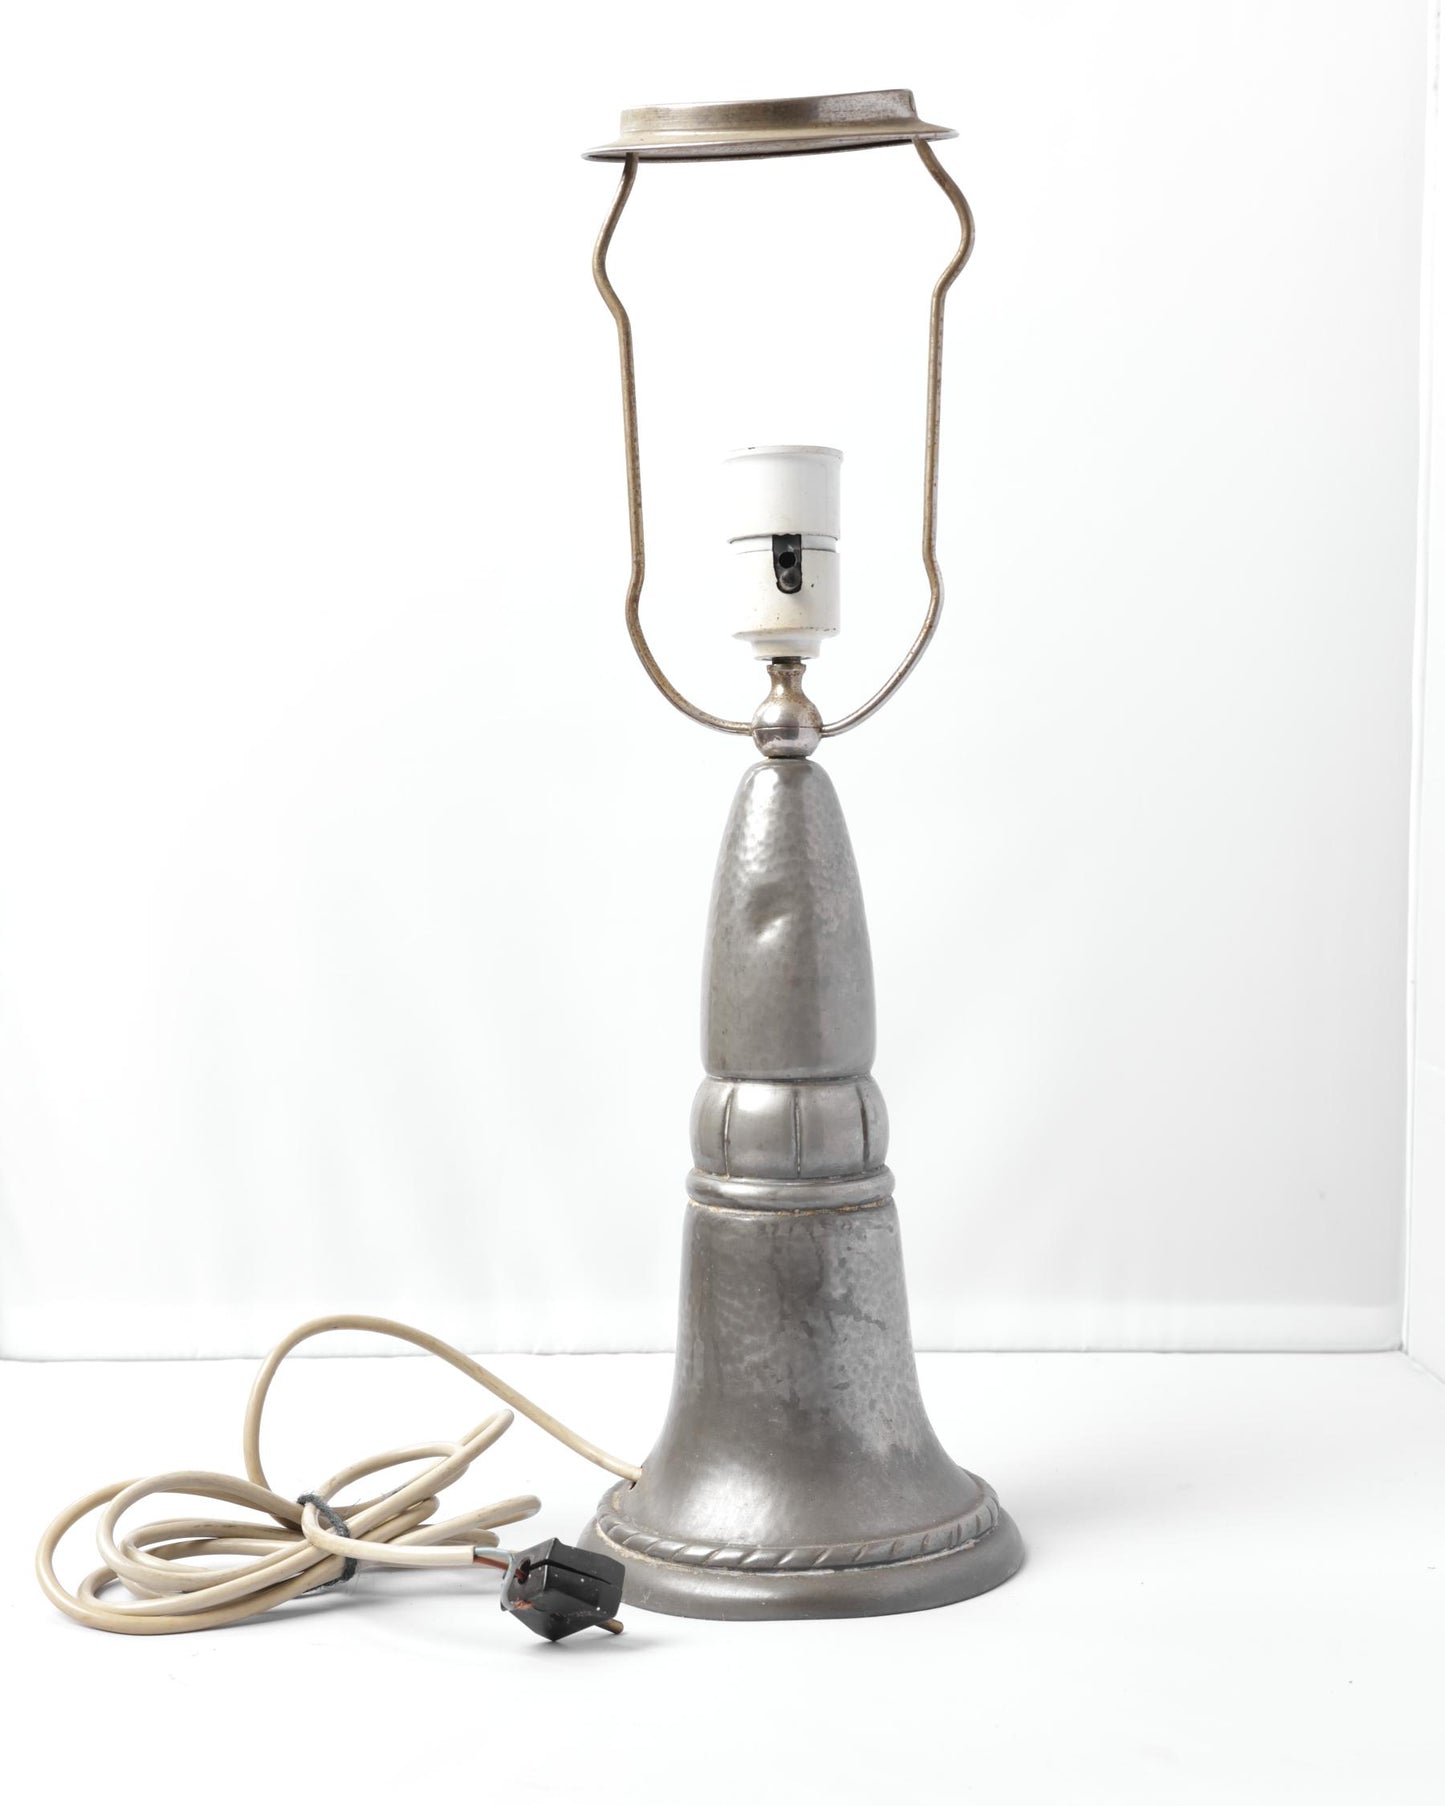 Early 20th Century Art Nouveau Hammered Tin Lamp, Denmark